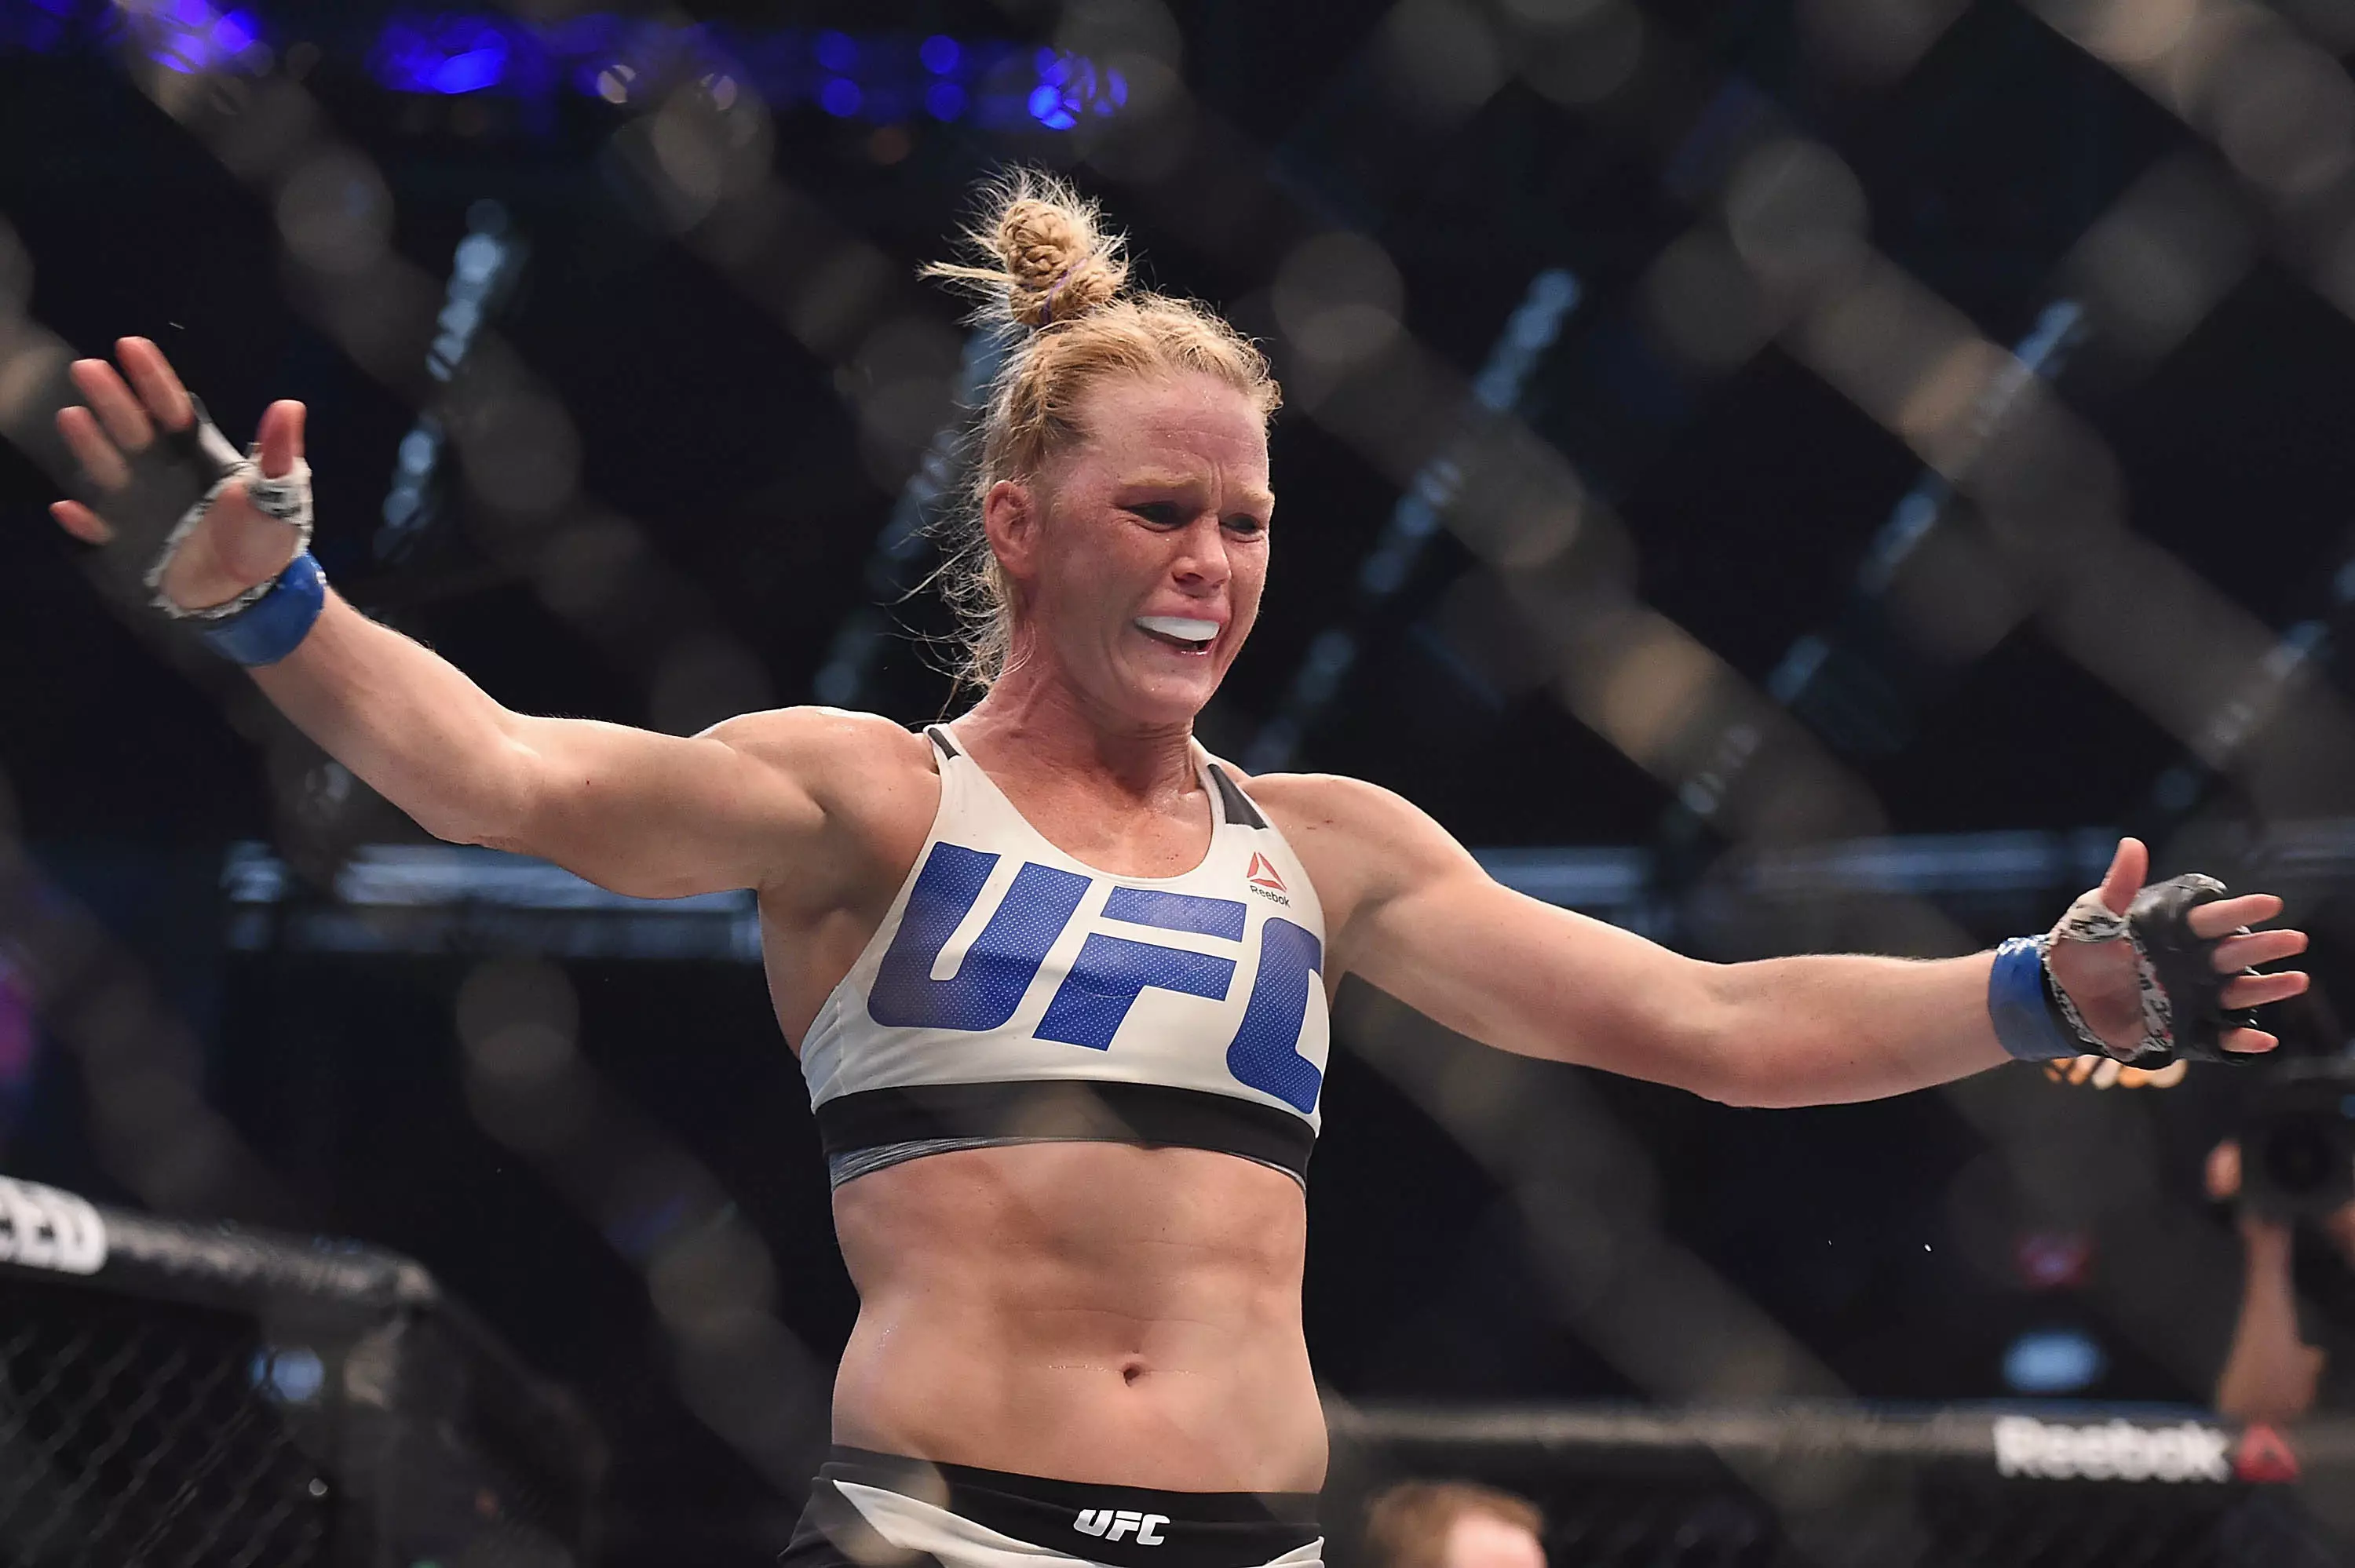 Holm's win was a huge shock. Image: PA Images